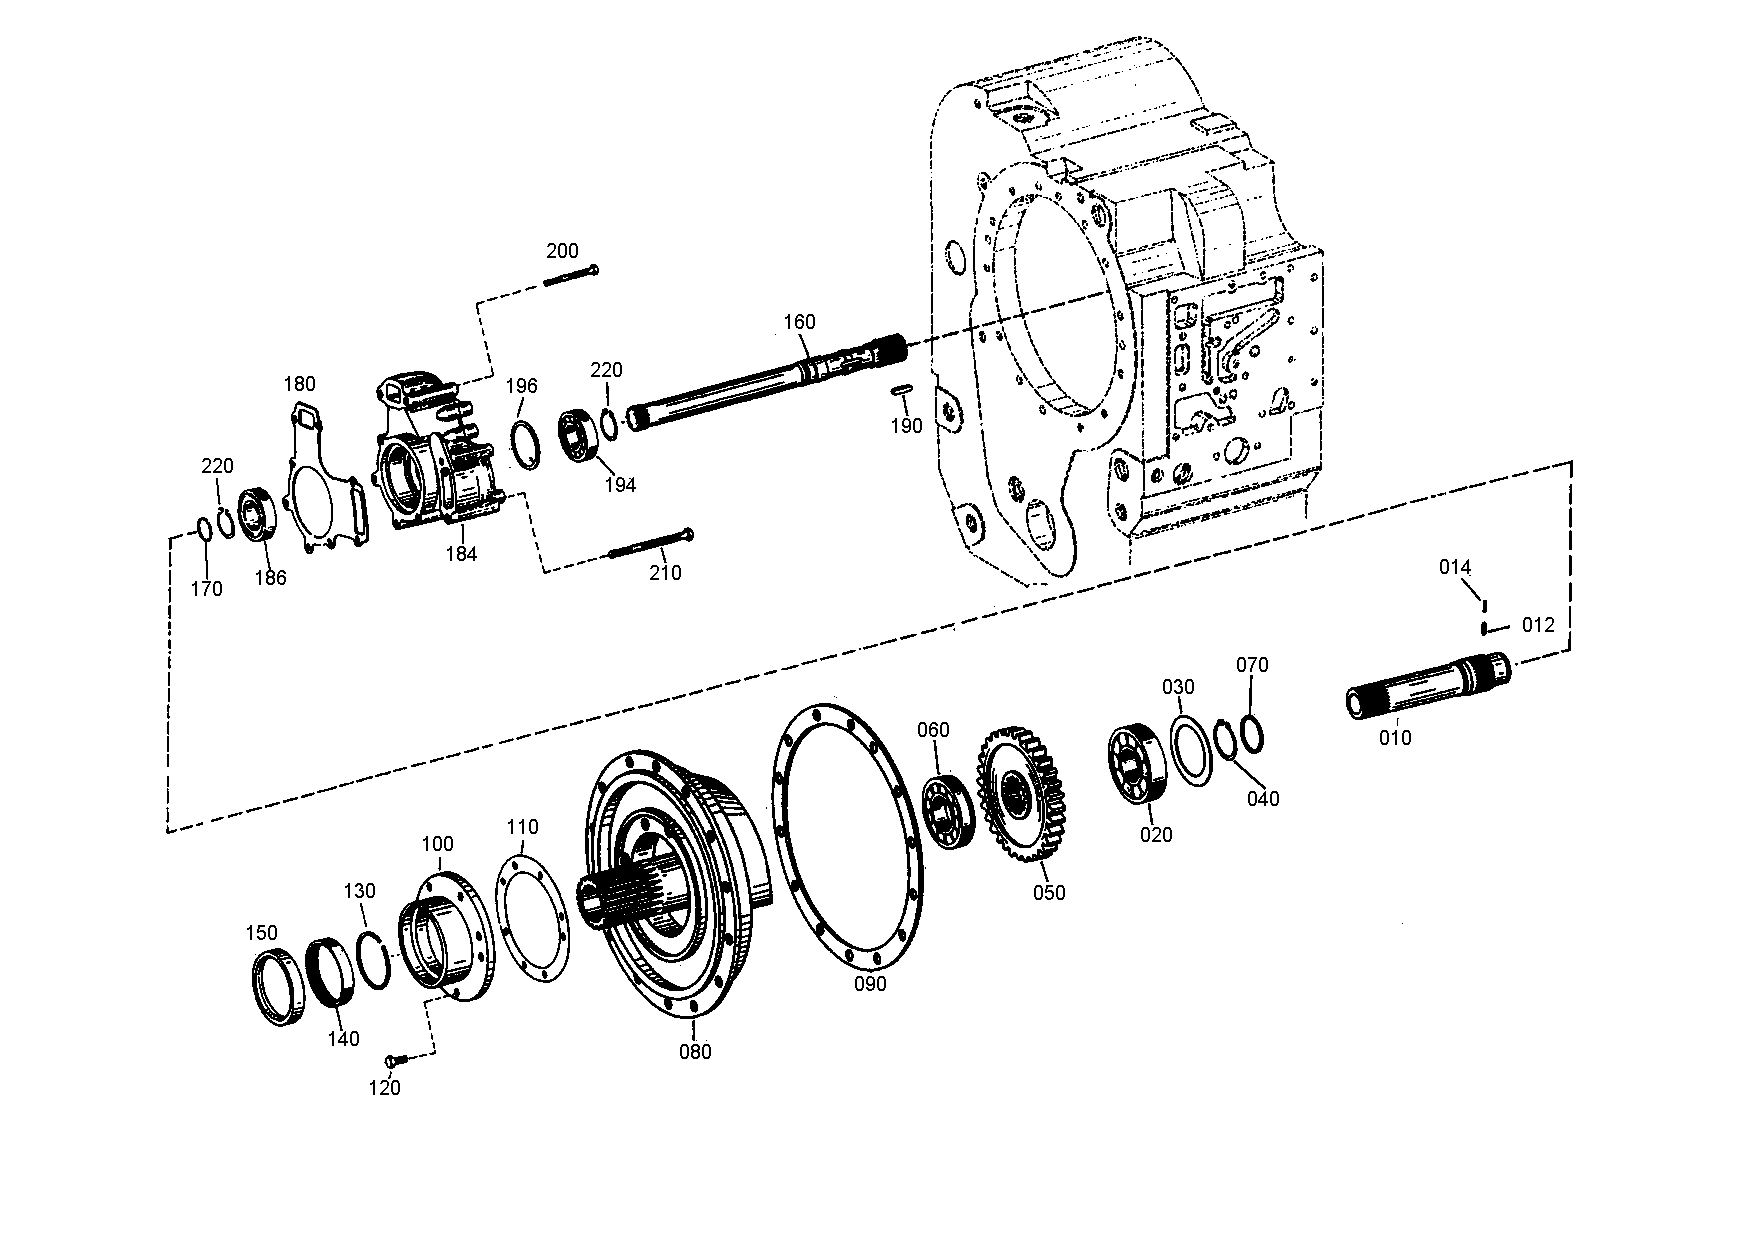 drawing for TEREX EQUIPMENT LIMITED 09397835 - INPUT GEAR (figure 3)